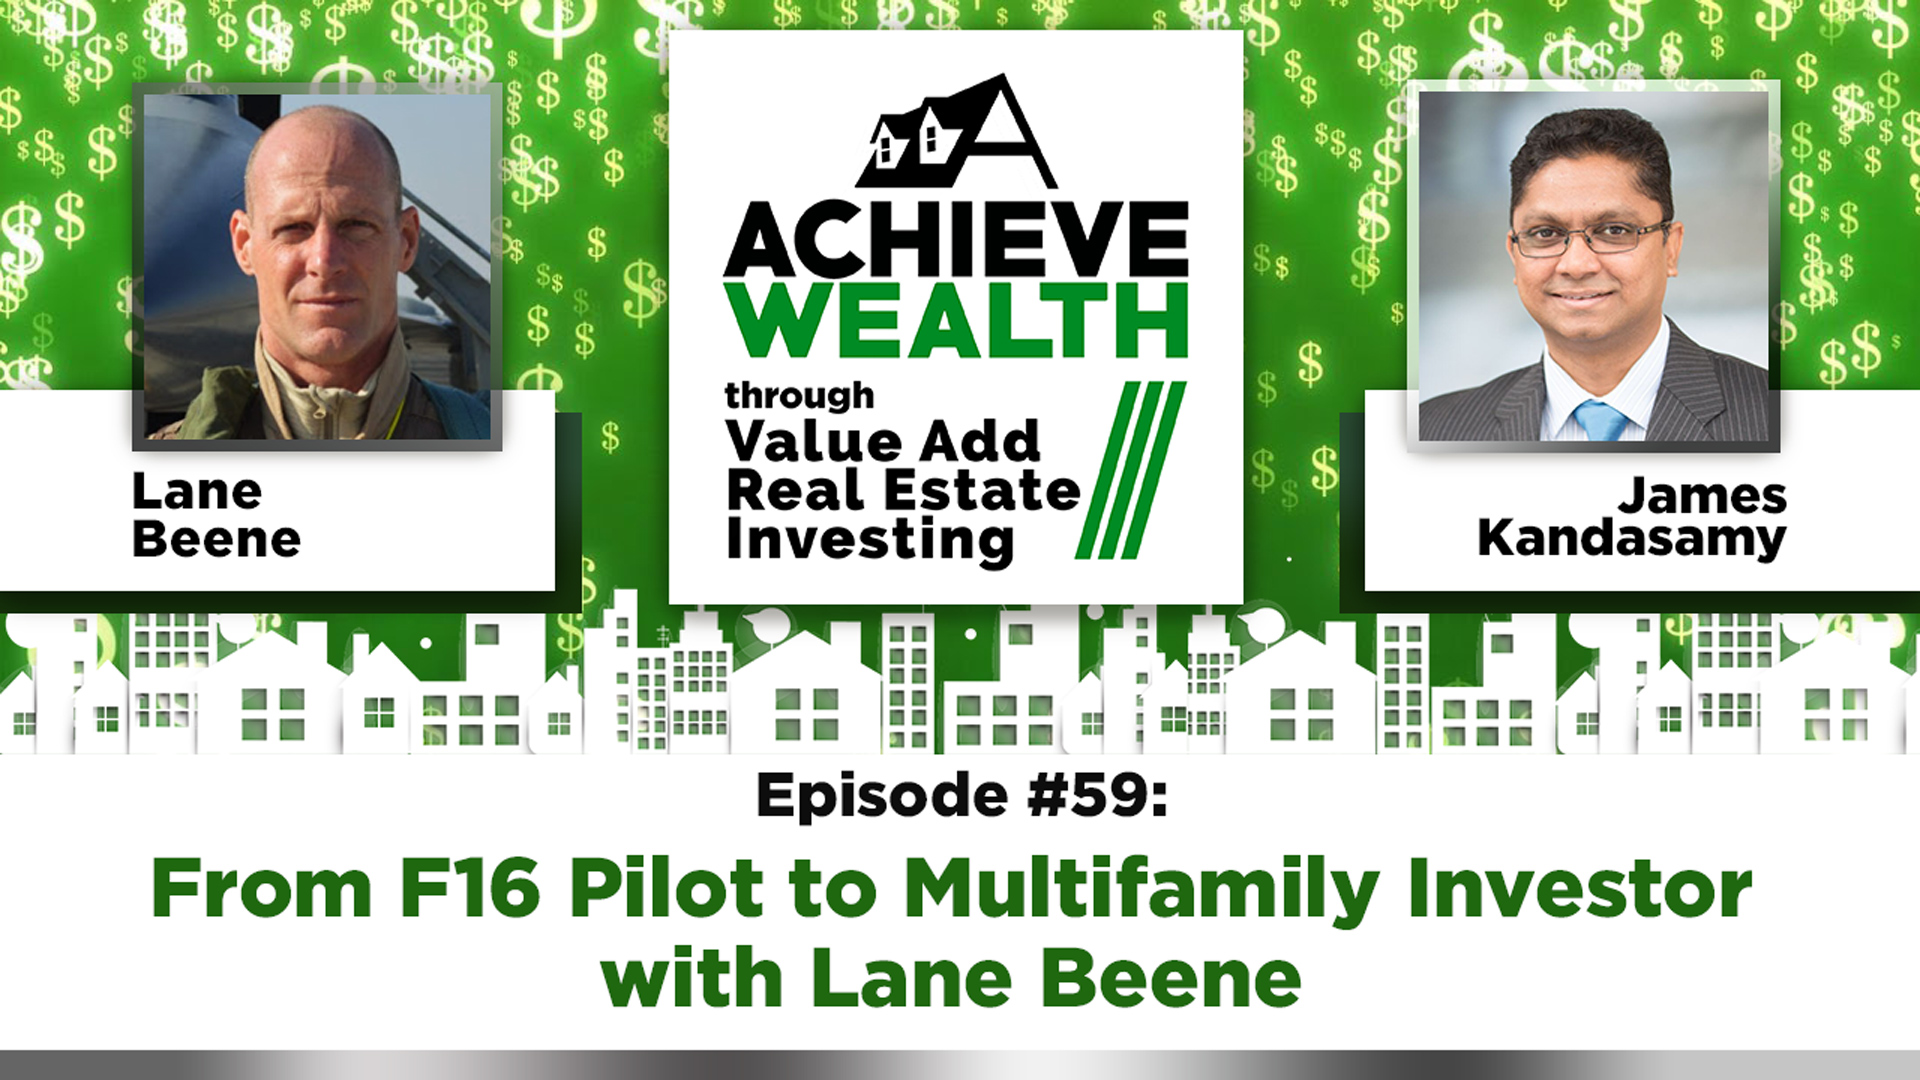 Ep#59 From F16 Pilot to Multifamily Investor with Lane Beene